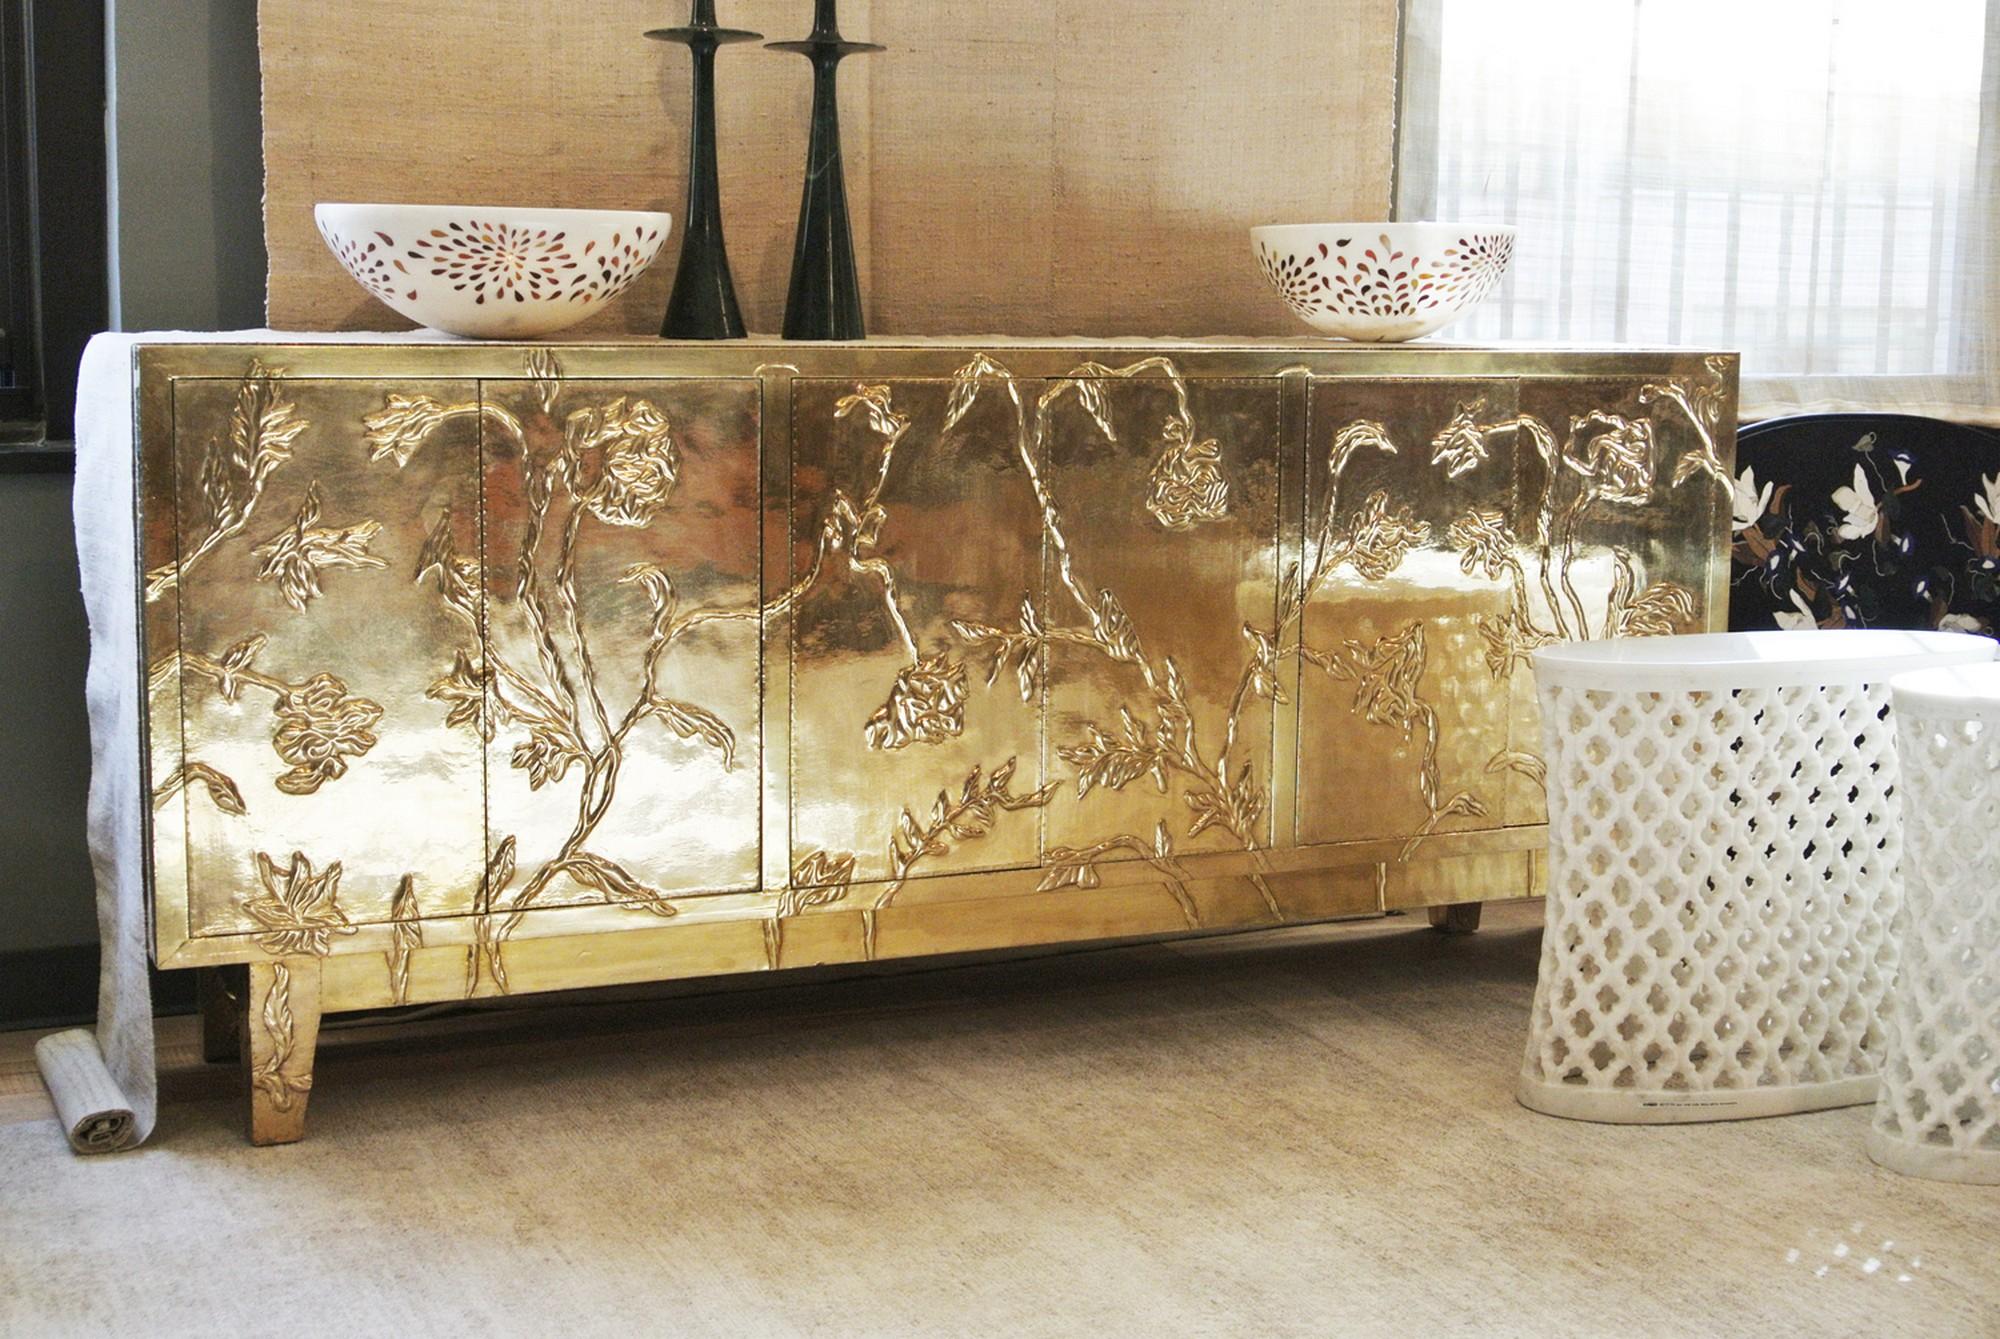 Modern Credenza Sideboard in Floral Brass Clad, Handmade in India by S. Odegard For Sale 3